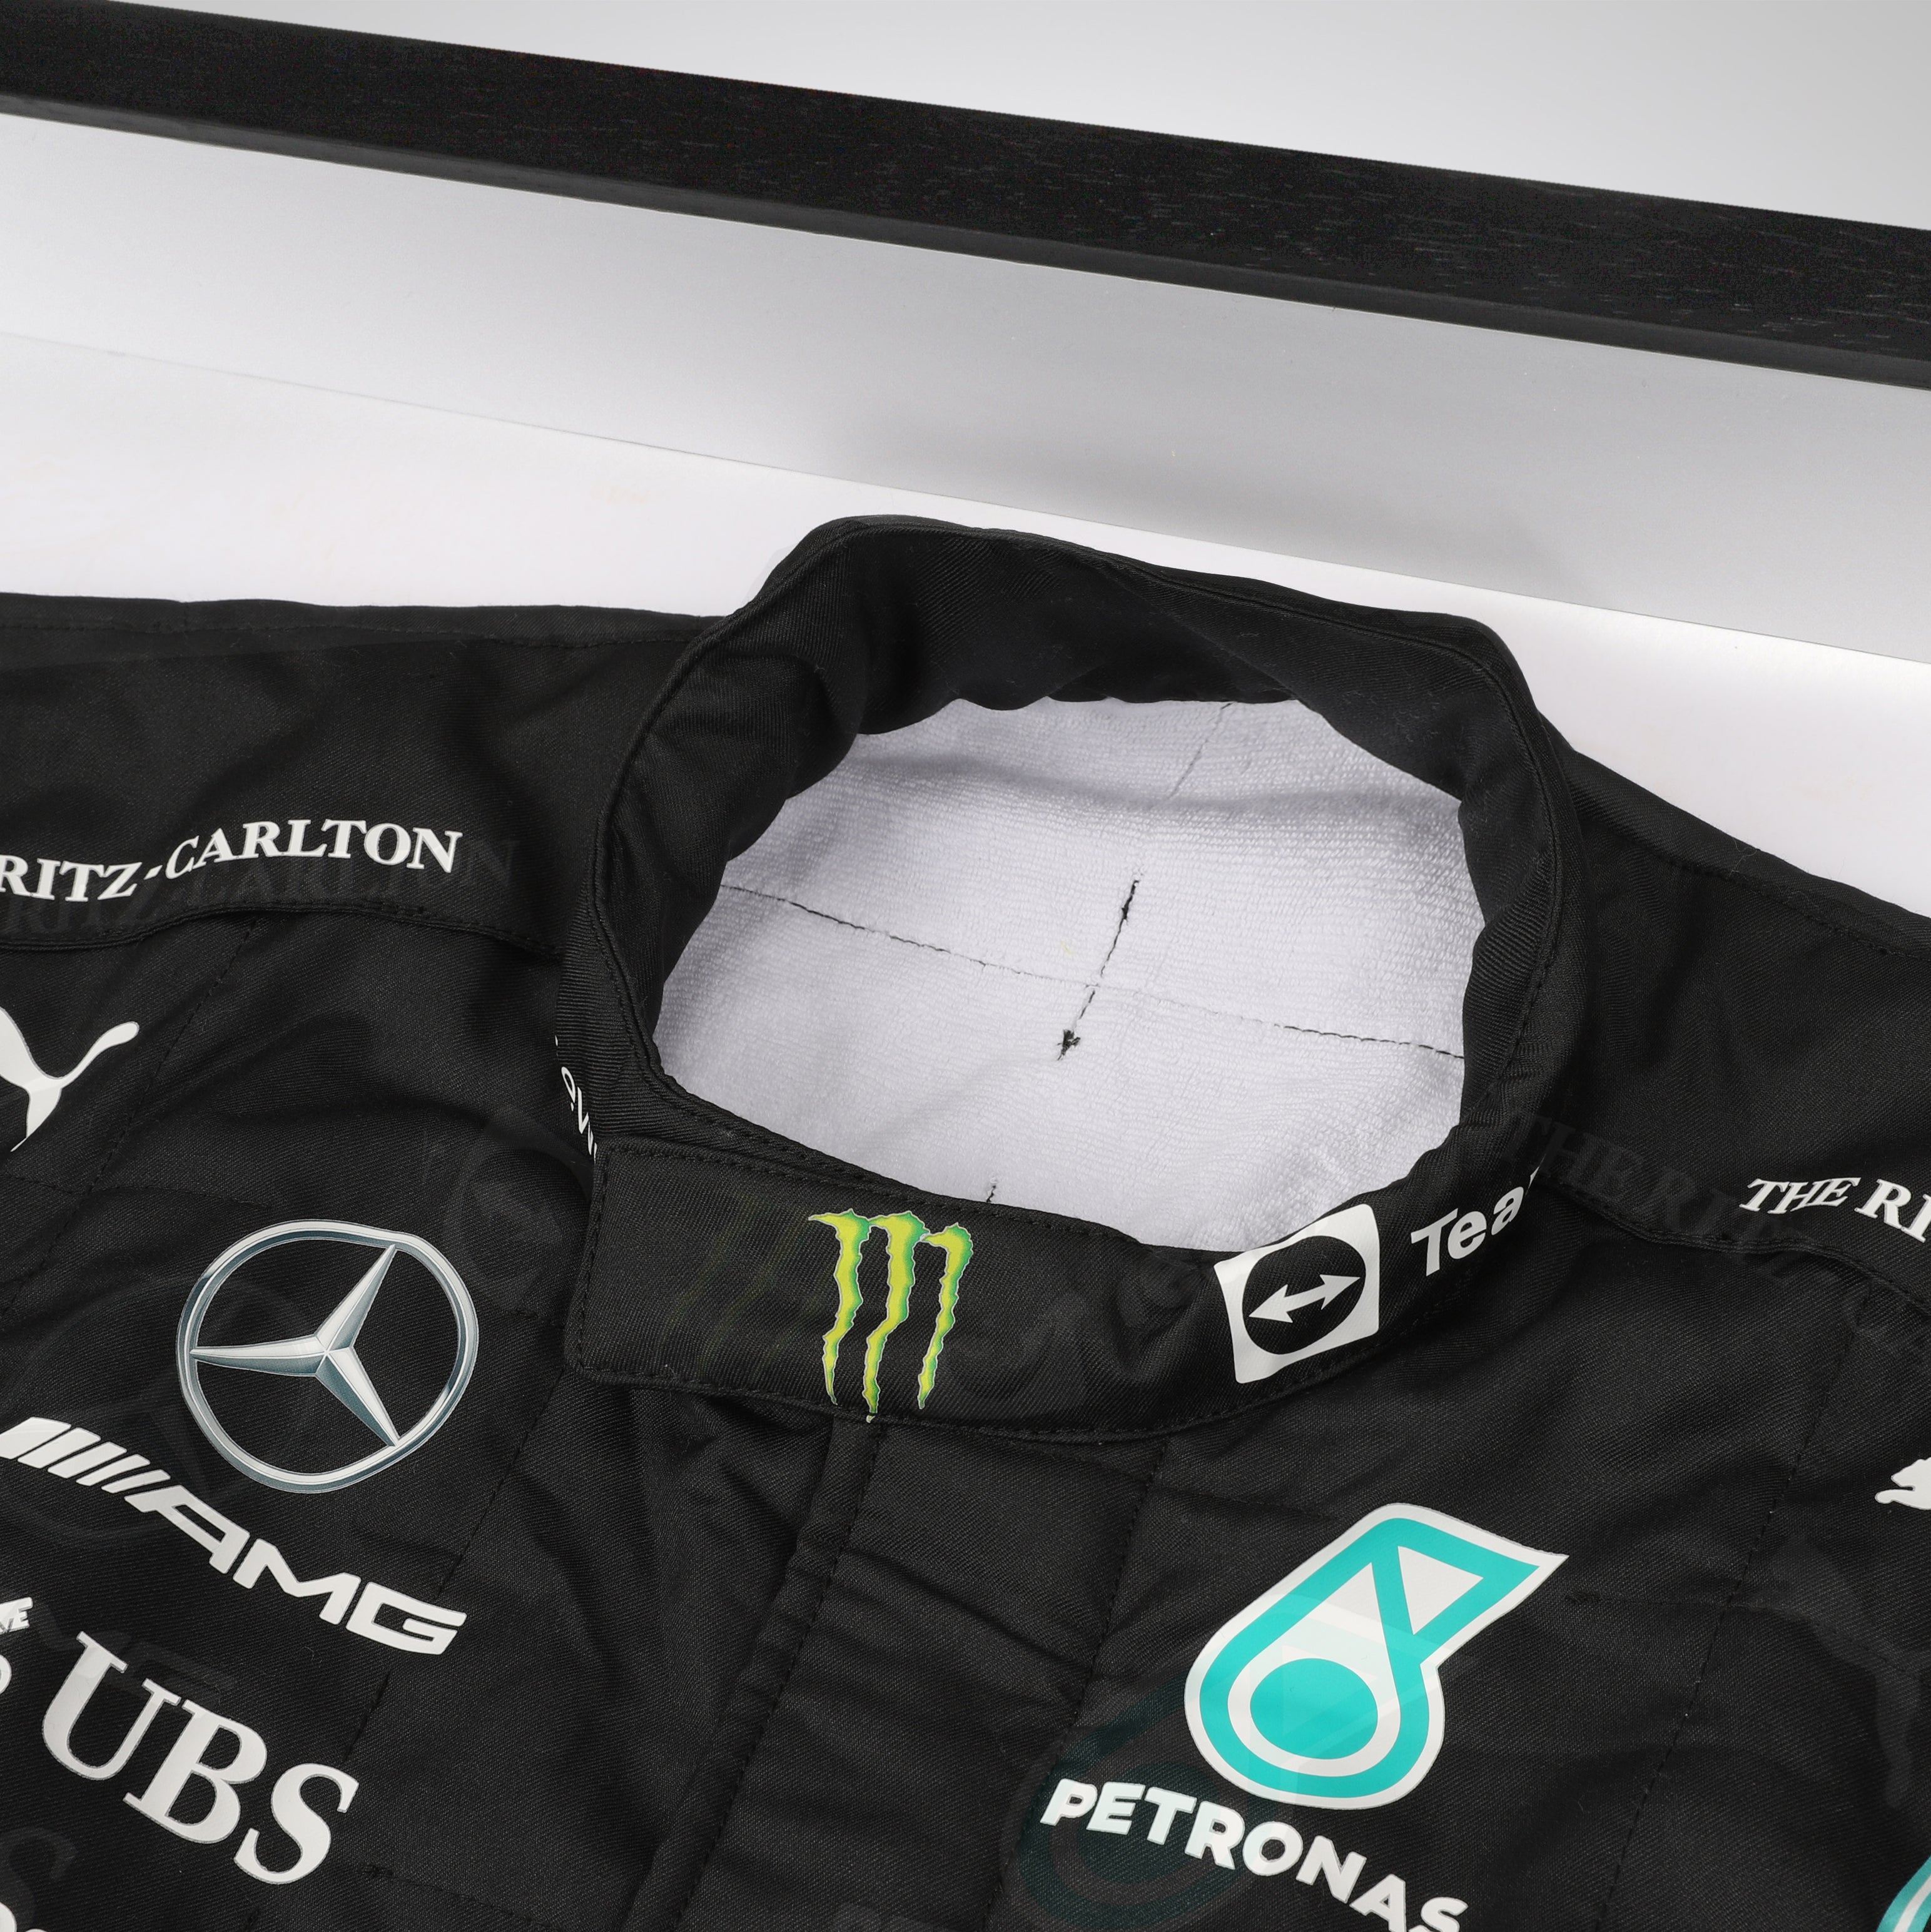 Officially Licensed 2021 Mercedes-AMG Petronas F1 Team Suit - Lewis Hamilton Edition